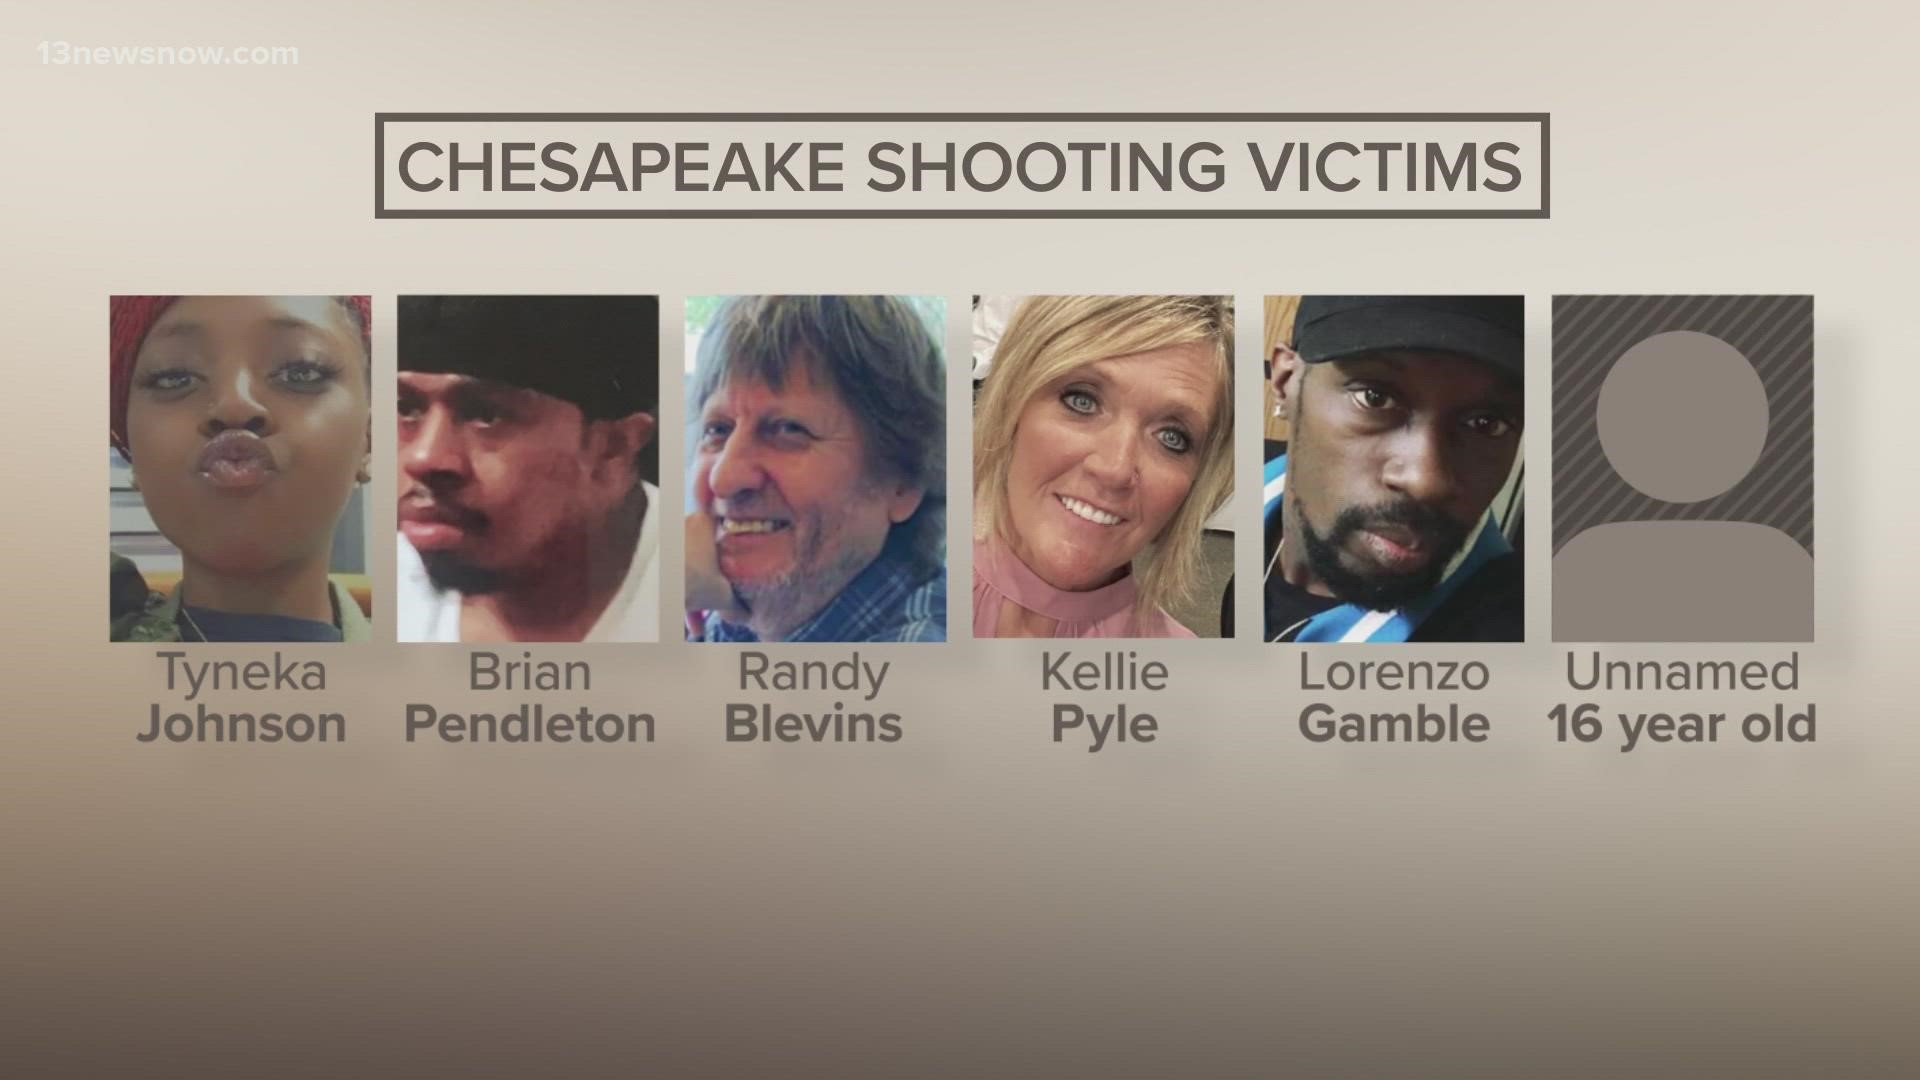 The gunman killed six people before turning the gun on himself, leaving families grieving and searching for answers.